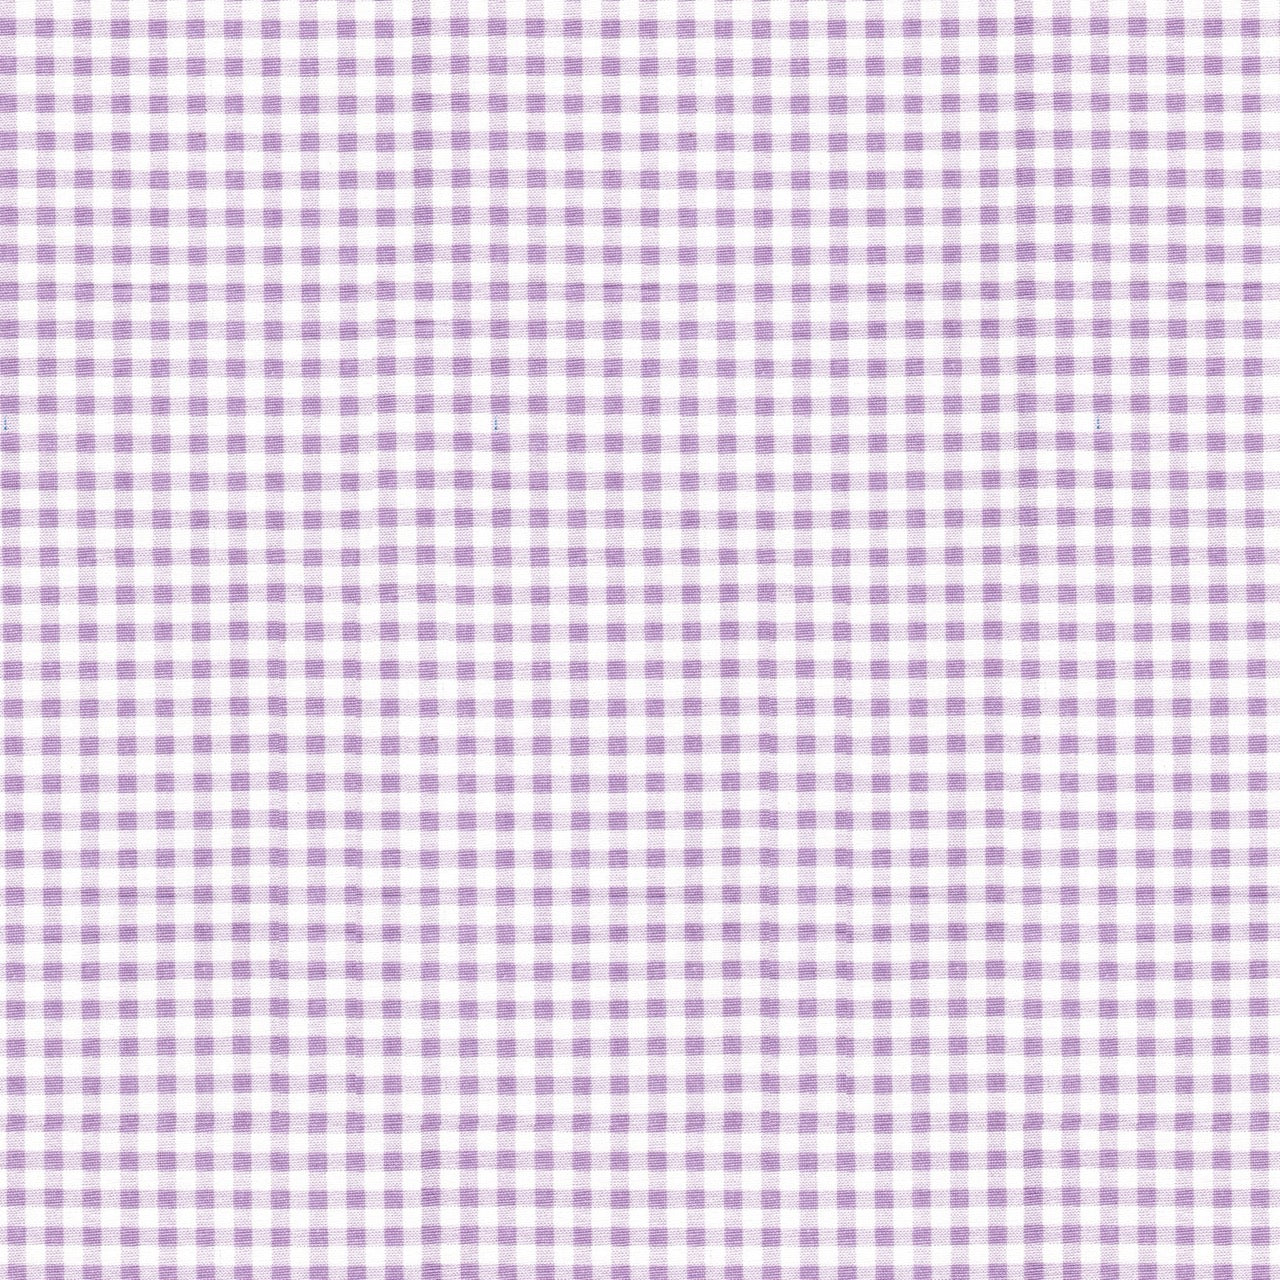 Pillow Sham in Orchid Large Gingham Check on White